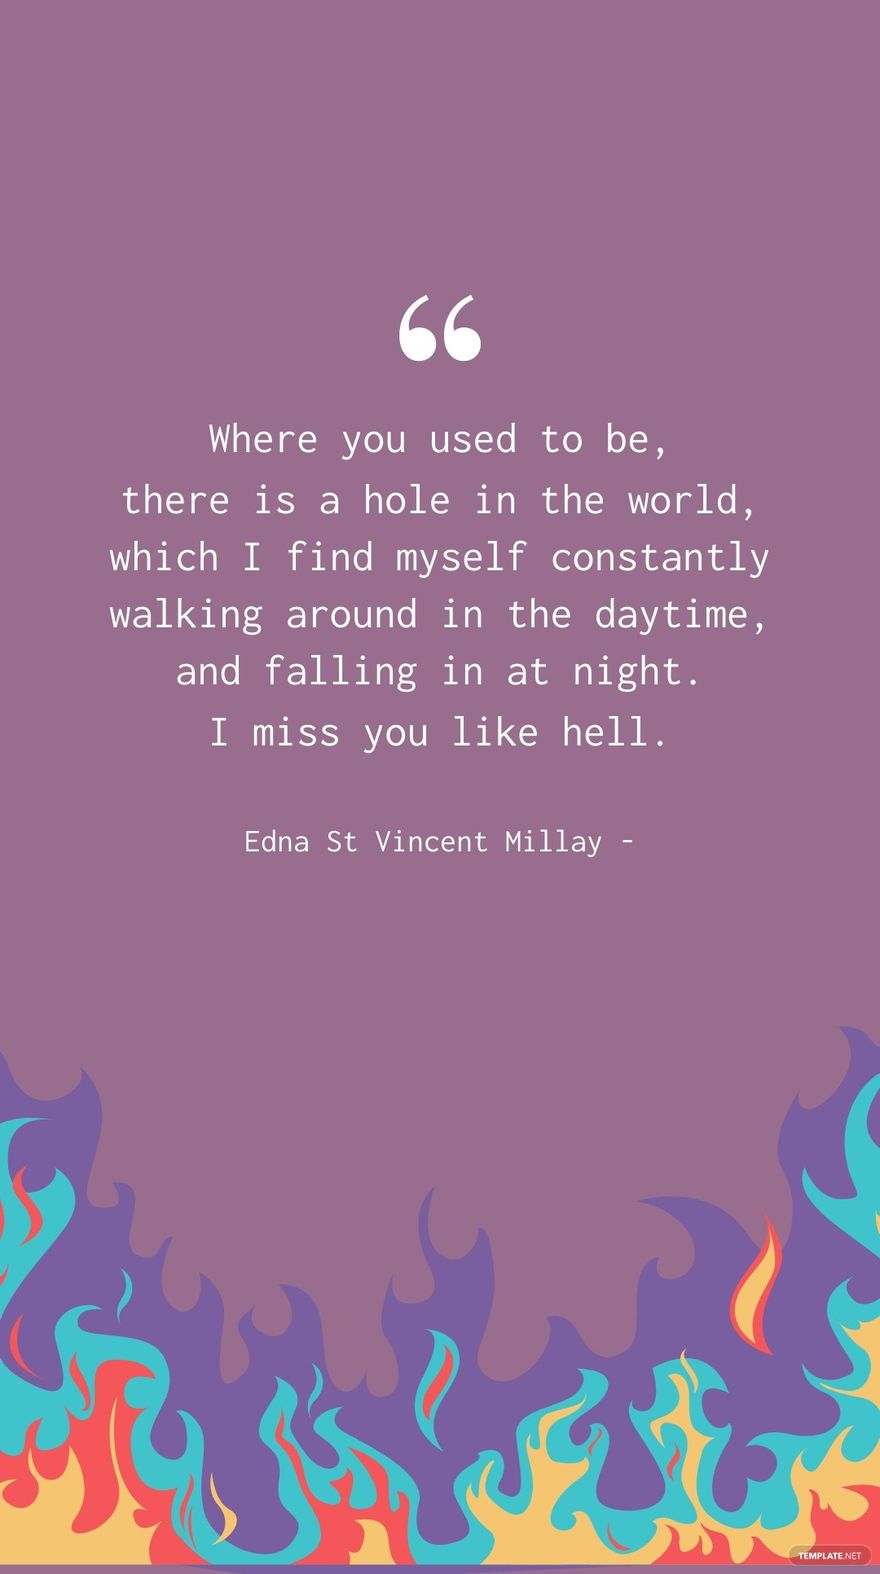 Edna St Vincent Millay - Where you used to be, there is a hole in the world, which I find myself constantly walking around in the daytime, and falling in at night. I miss you like hell.